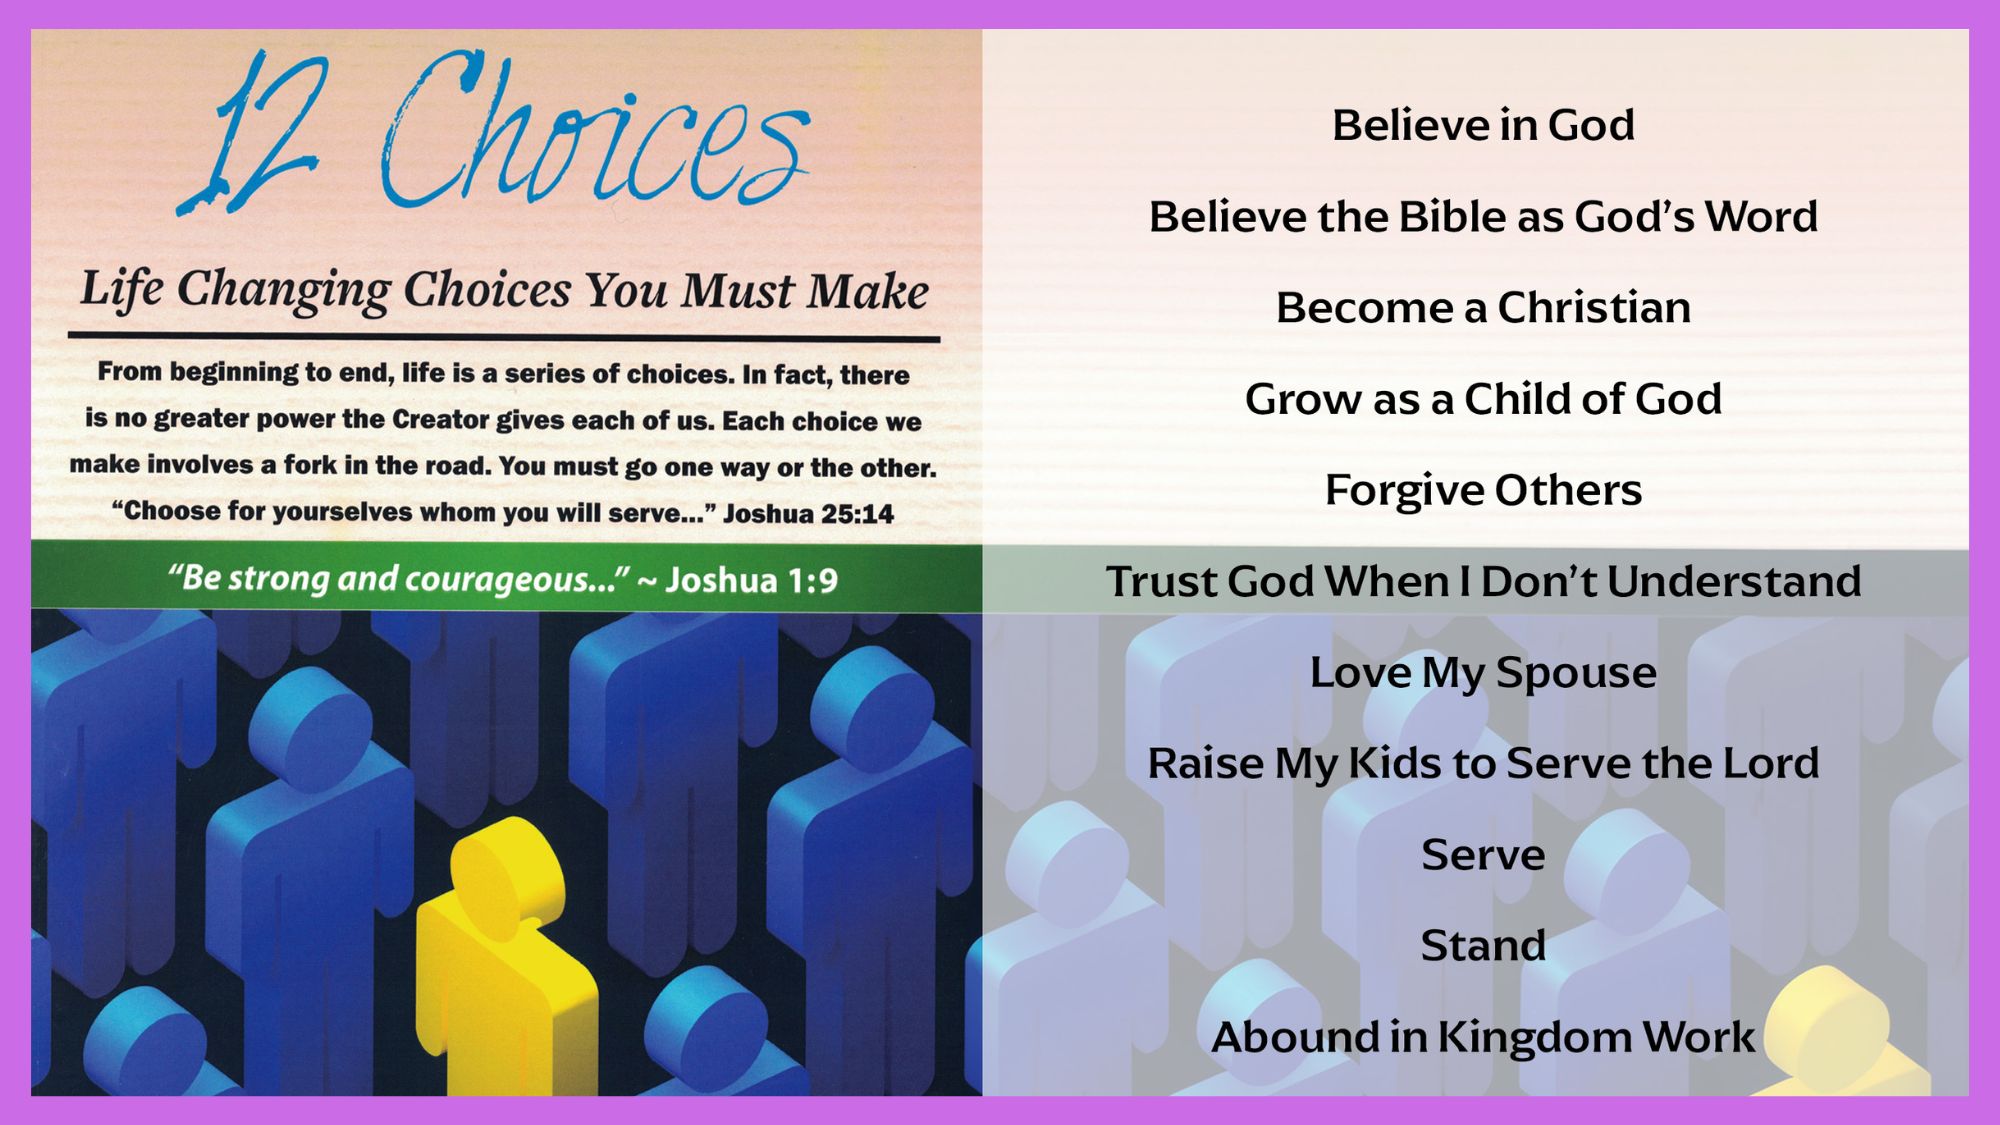 12 Choices - Life Changing Choices You Must Make: Choice # 9 Serve